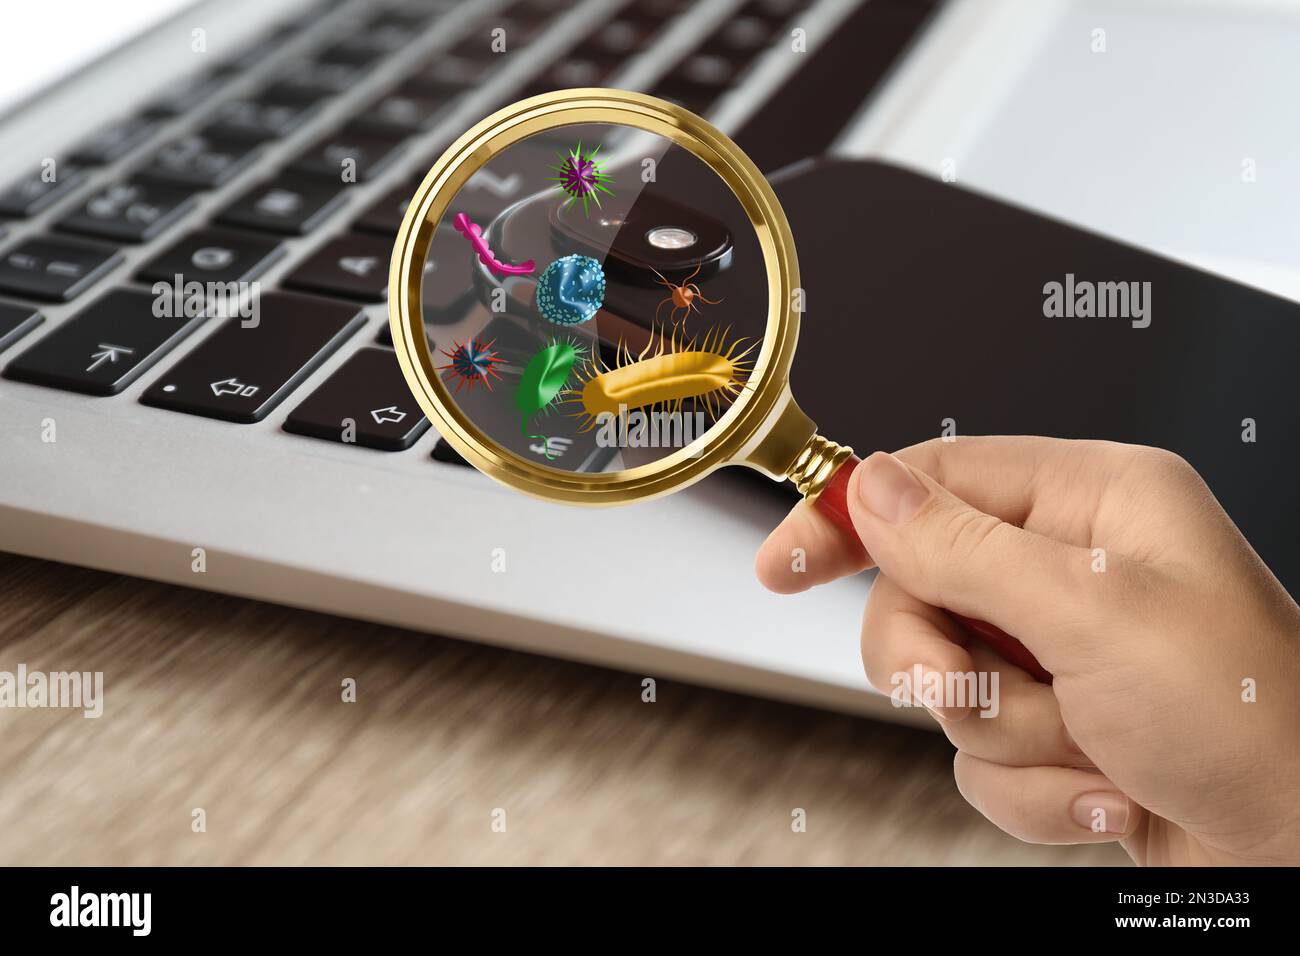 Woman with magnifying glass detecting microbes on laptop keyboard, closeup Stock Photo